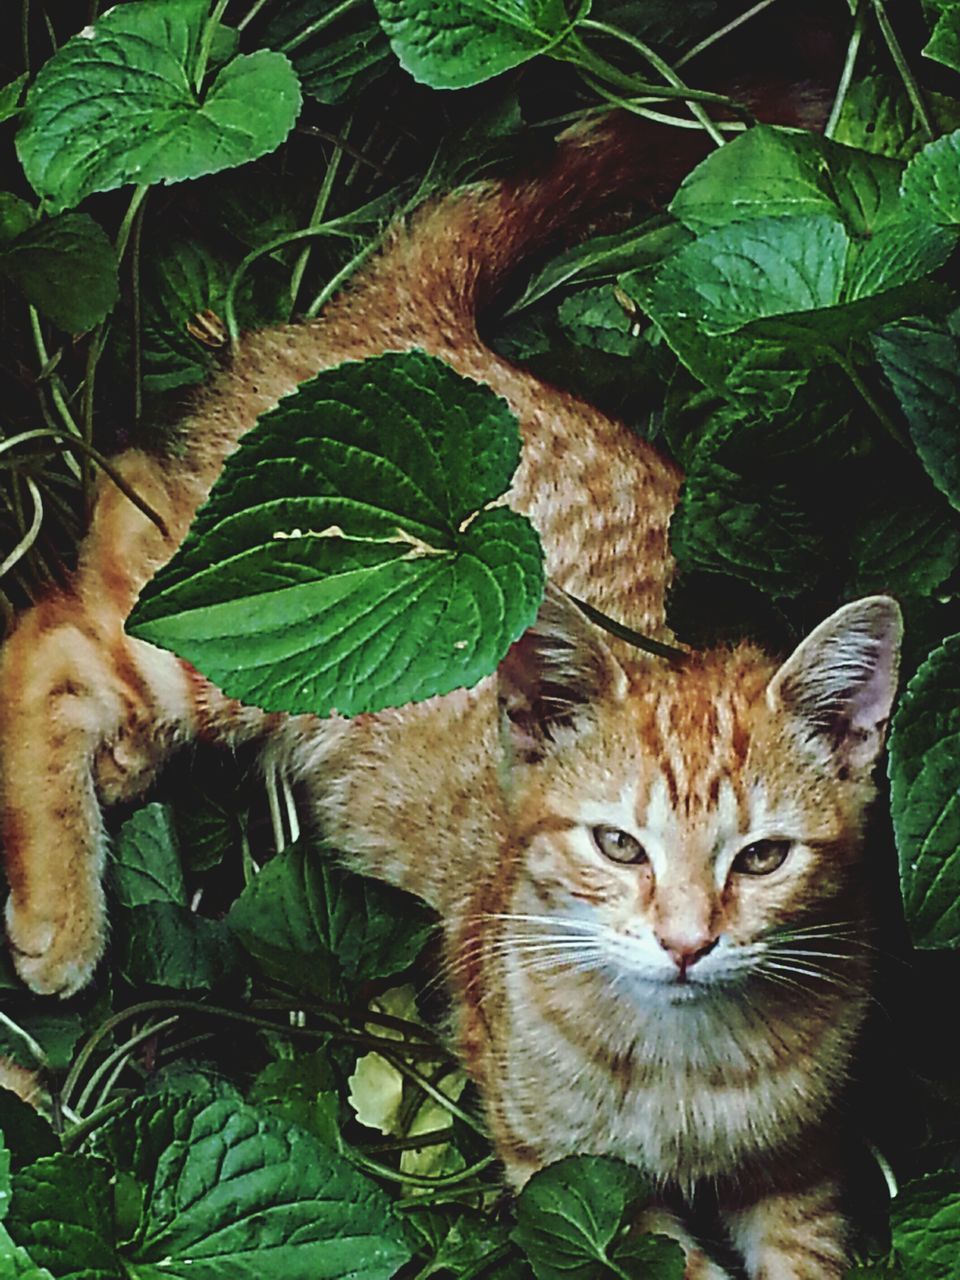 PORTRAIT OF A CAT WITH GREEN PLANTS